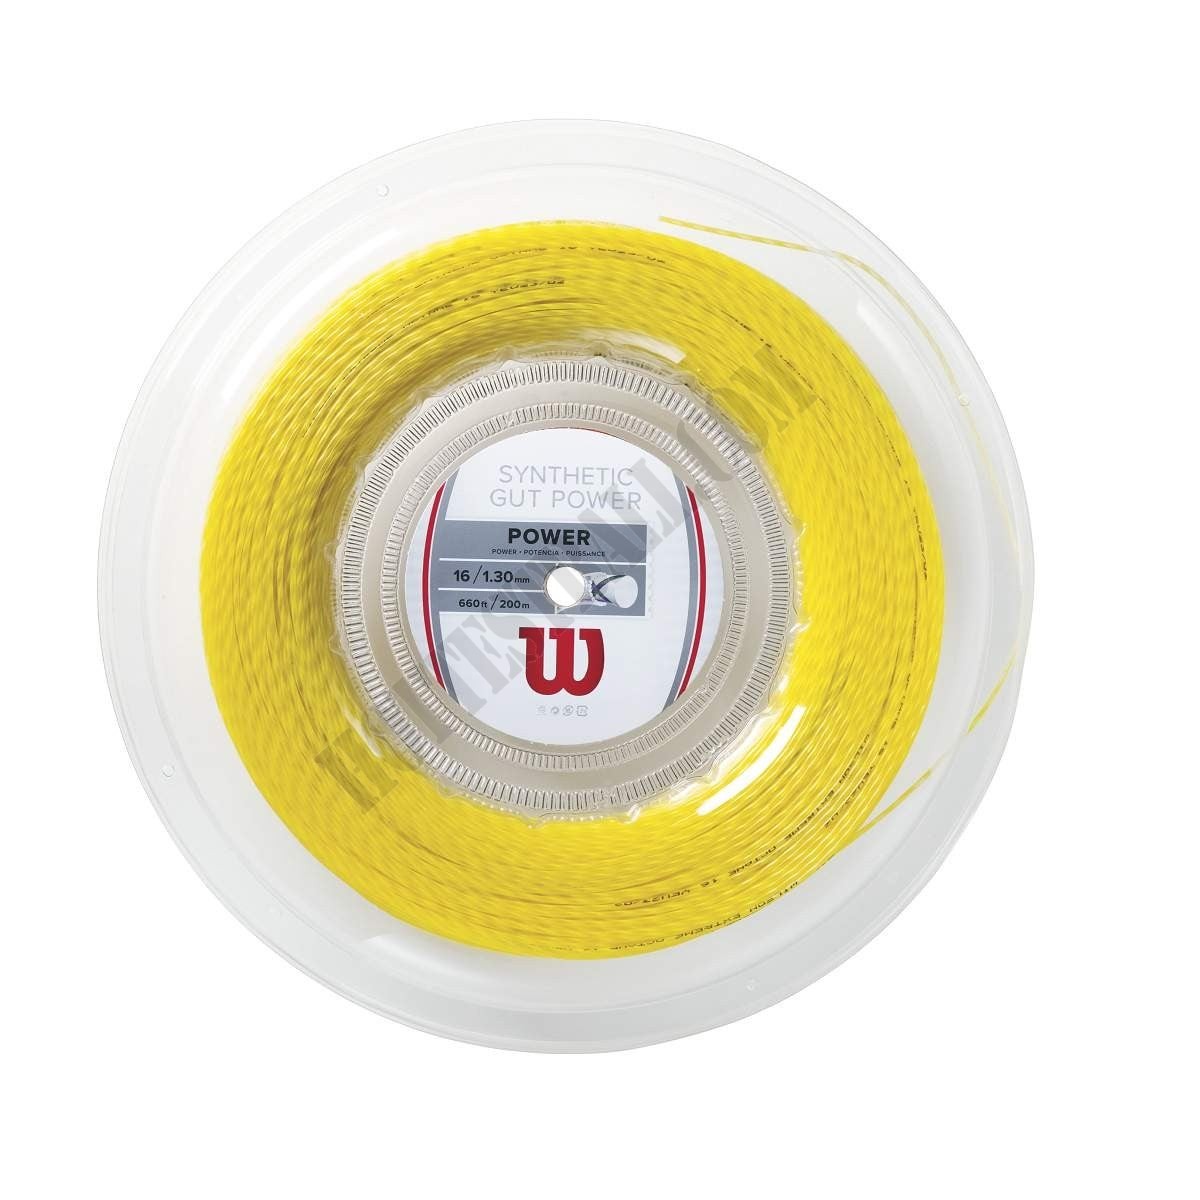 Synthetic Gut Power Tennis String - Reel - Wilson Discount Store - -1